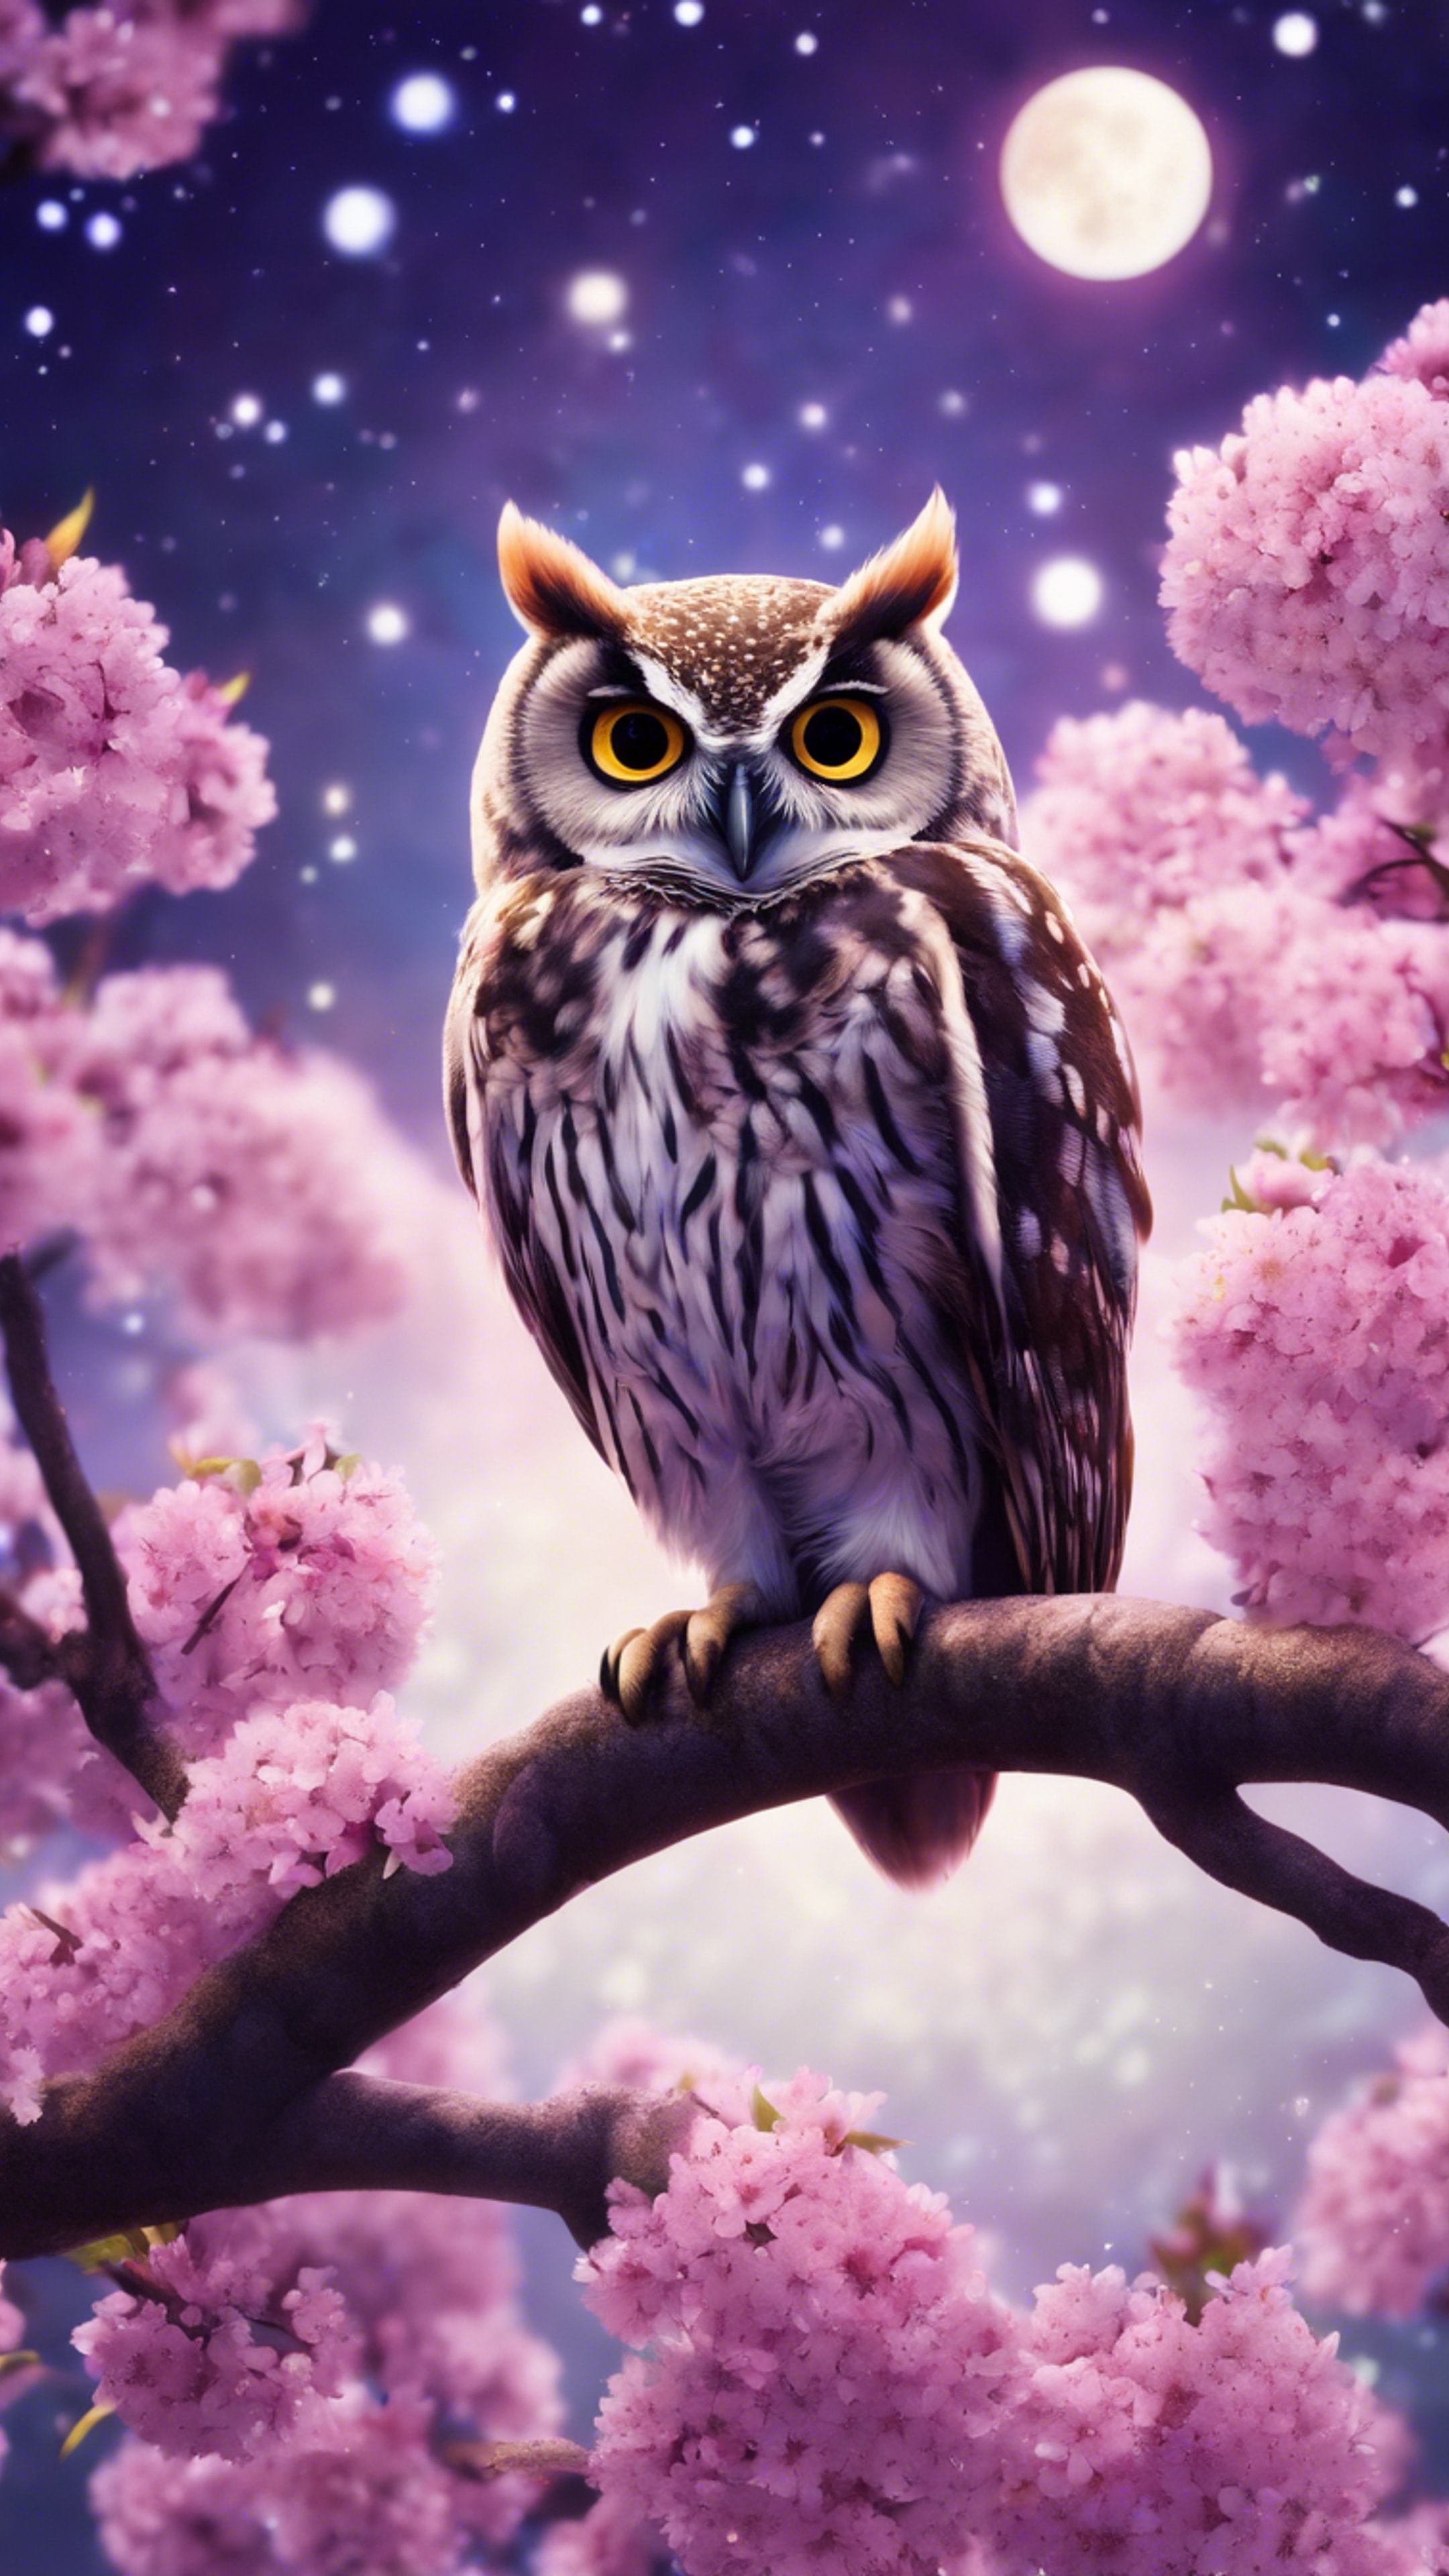 A cute kawaii style owl perched on a cherry blossom tree that blooms vibrant purple flowers, under a moonlit starry night. Behang[d4c437875b7e43ac9353]